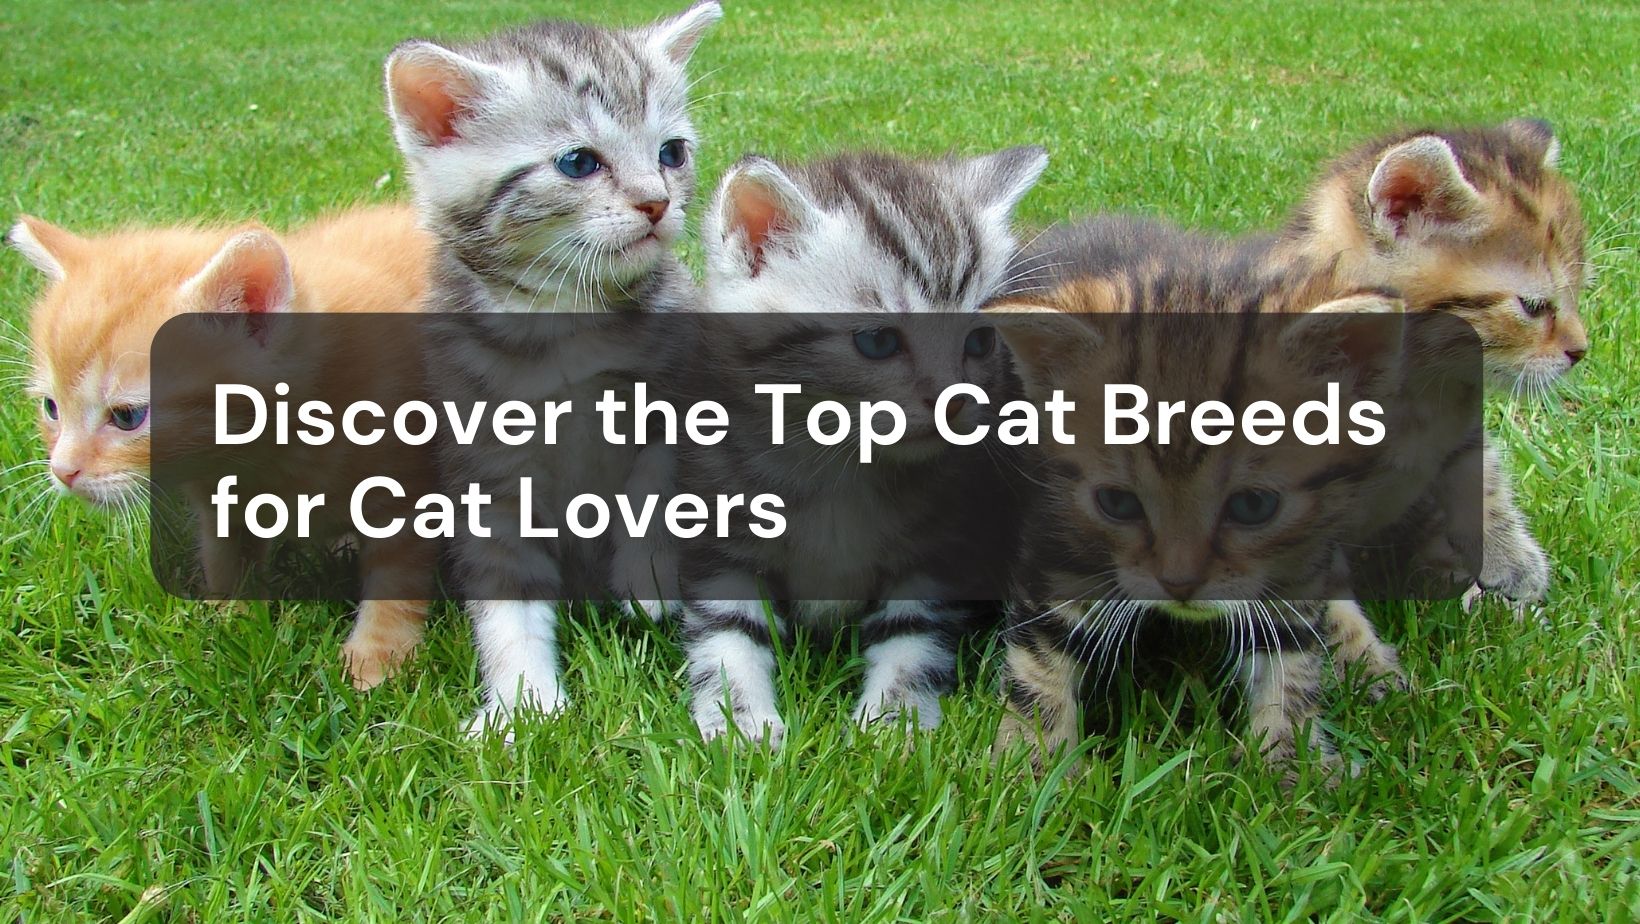 Discover the Top Cat Breeds for Cat Lovers